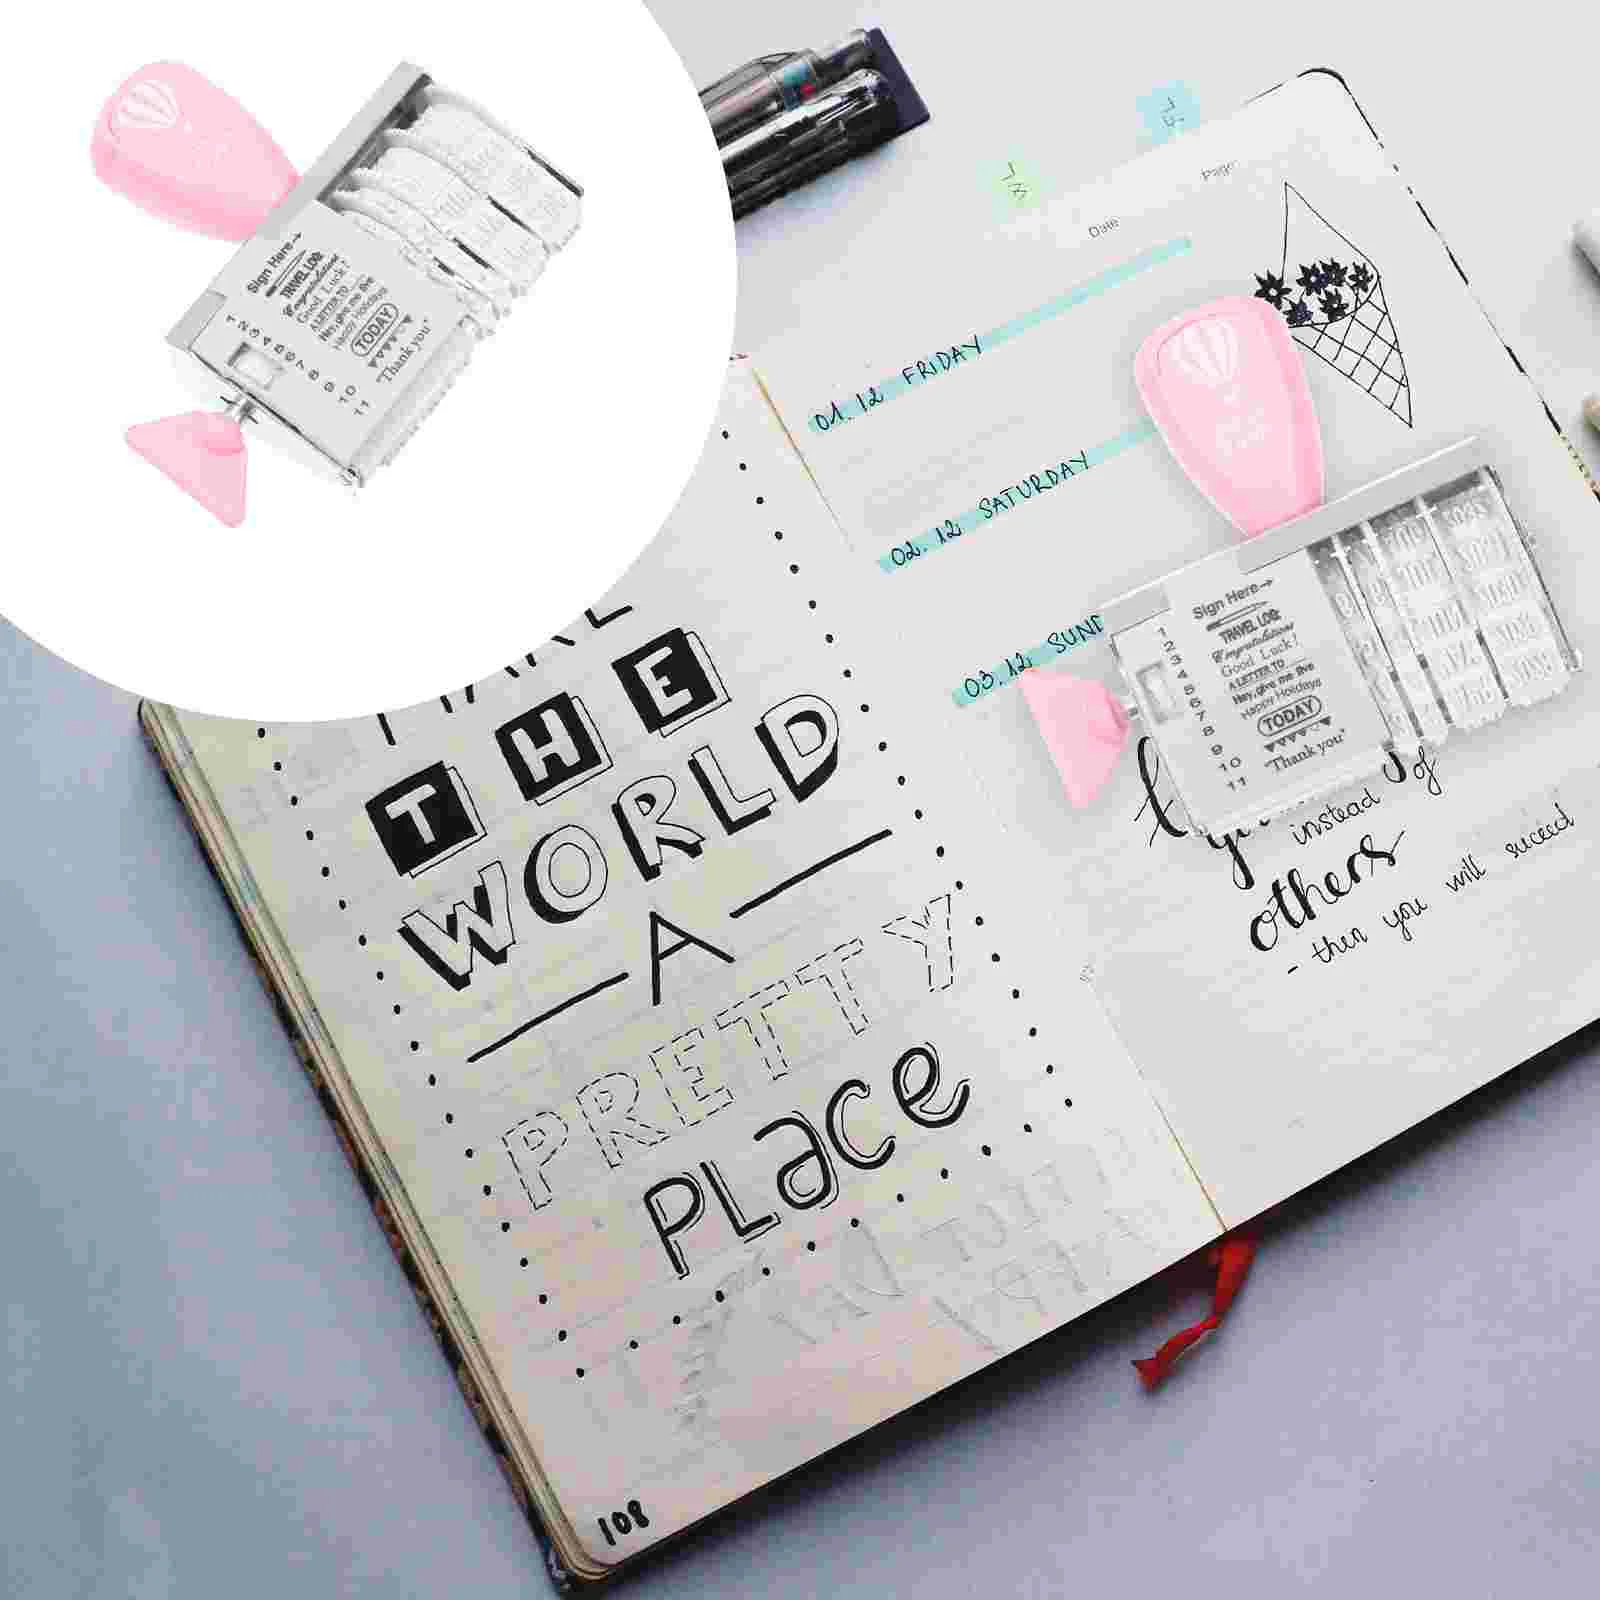 40pcs pack scrapbook stickers decoration diy album diary planner stationery sticker stickers school supplies Seal Postage Stamps DIY Planner Knob Useful Date Plastic Rollers Scrapbook Supplies School Stationery